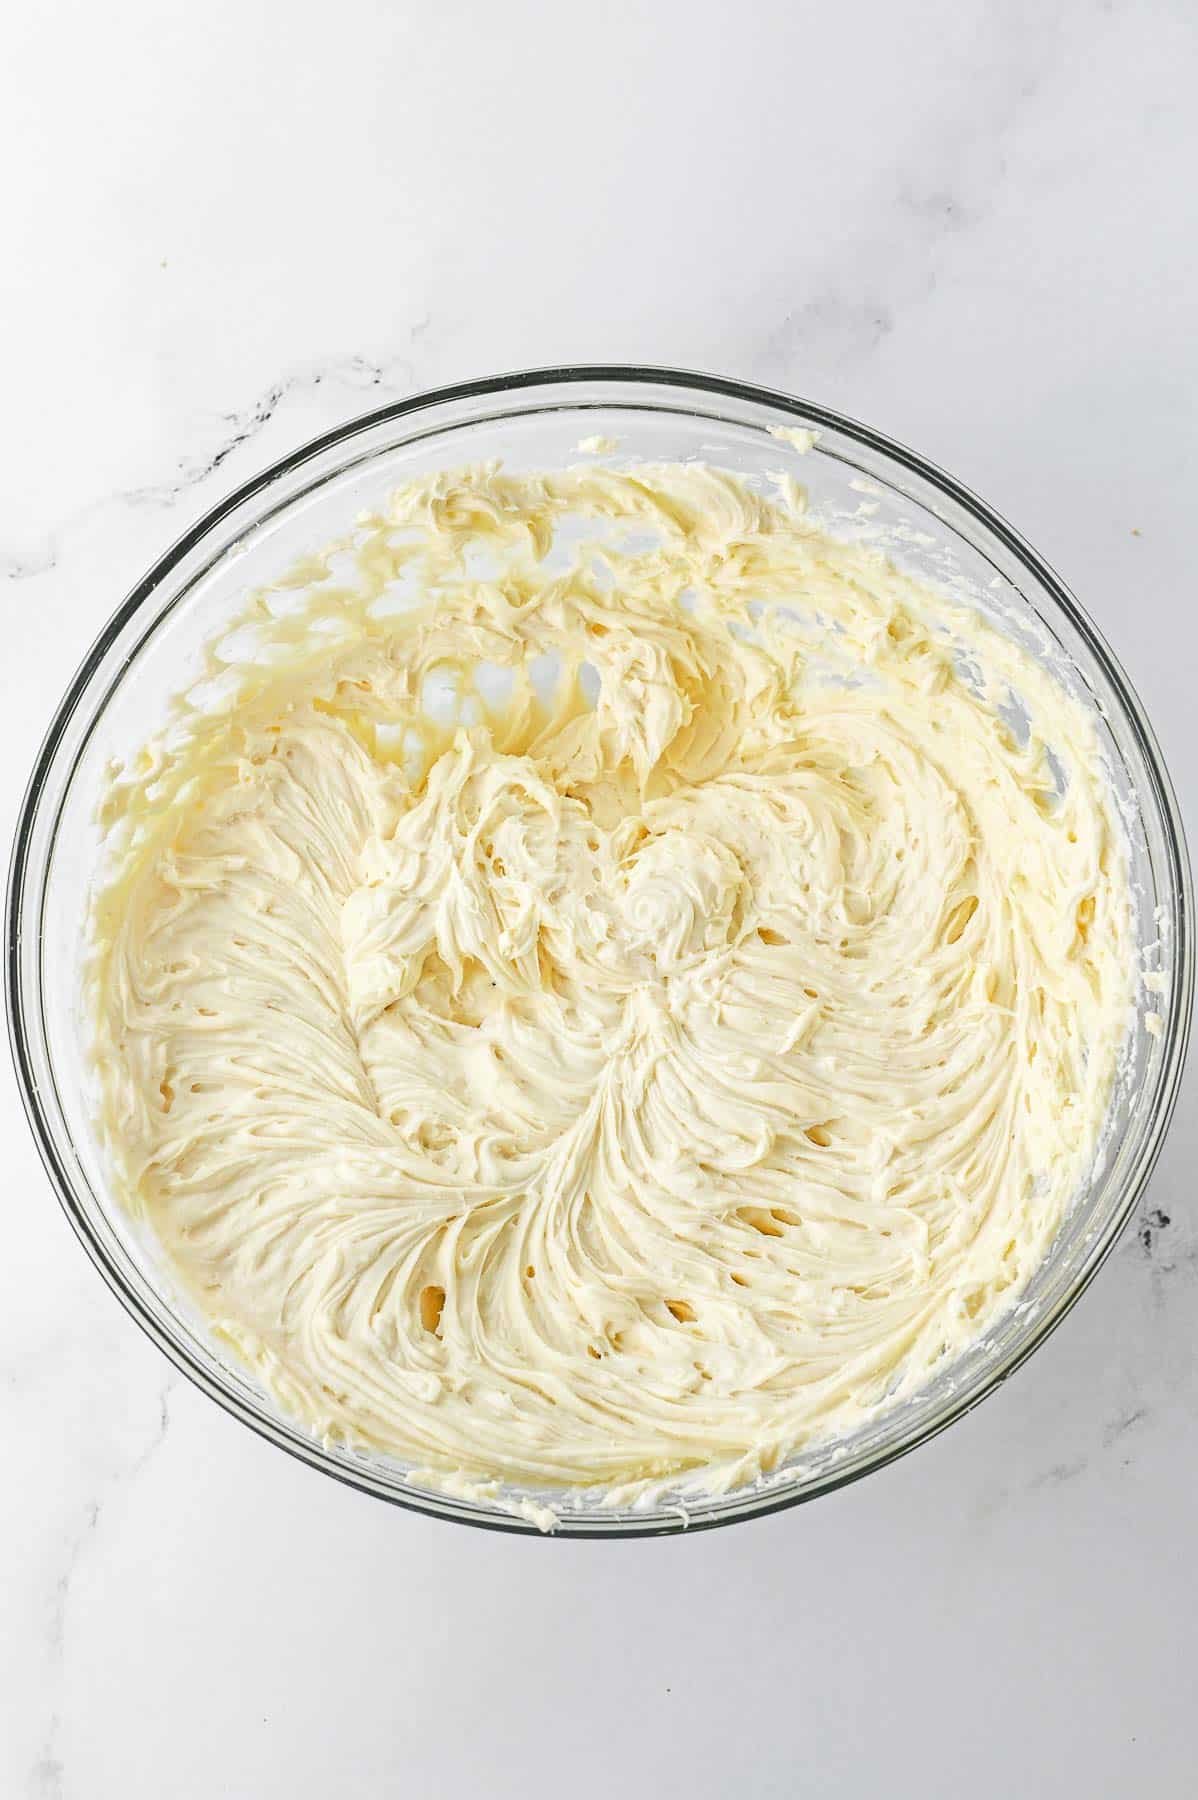 Whipped cream cheese mixture in a glass bowl.